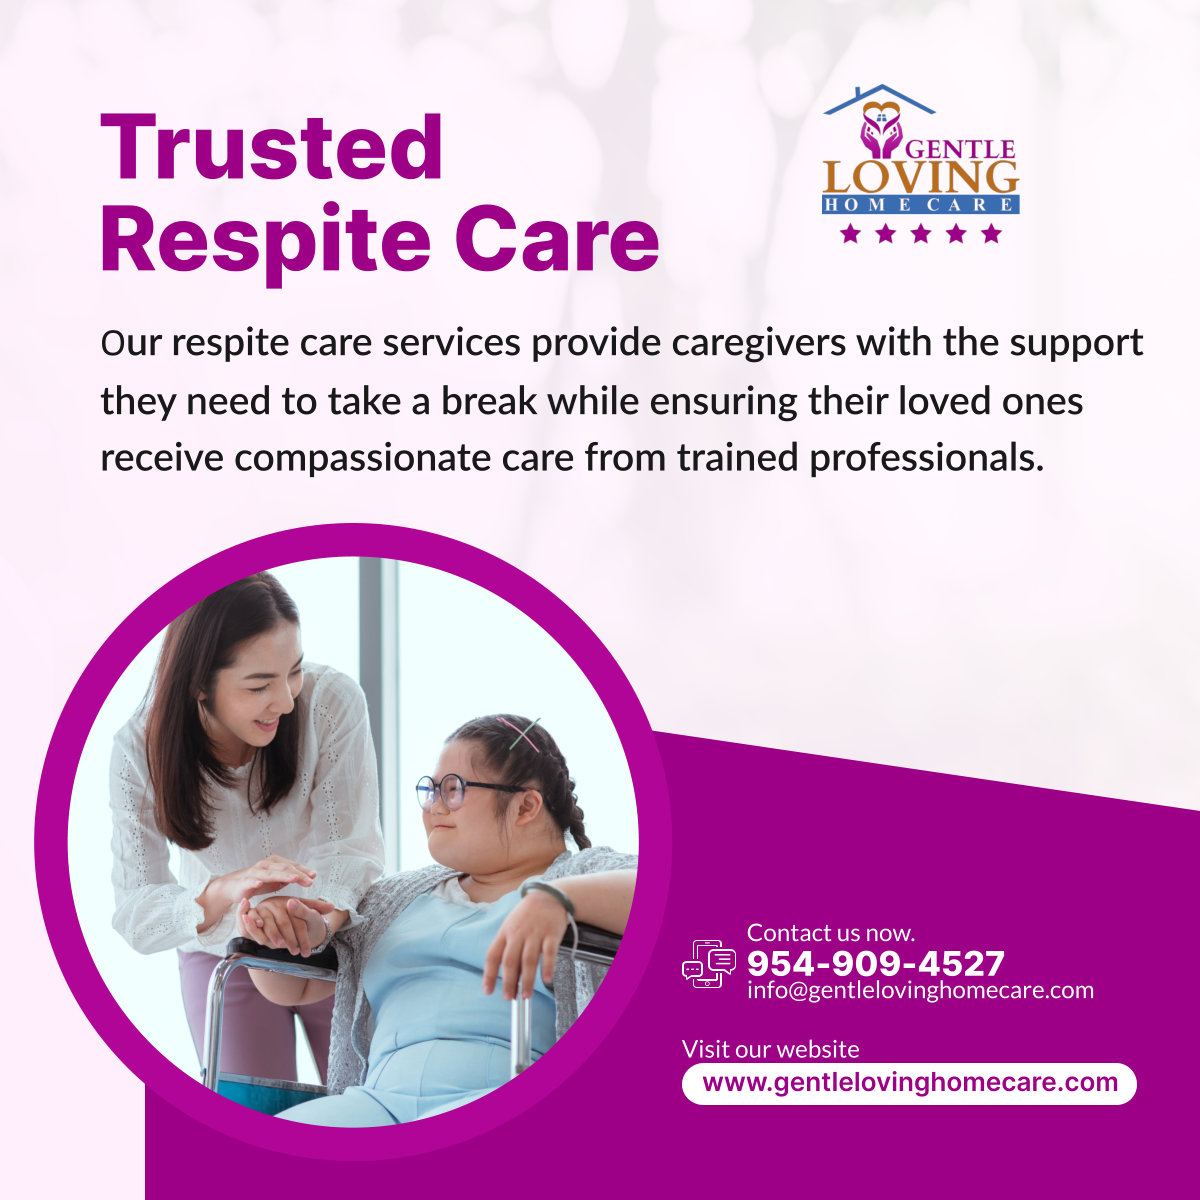 Take a well-deserved break with our trusted respite care services. Contact us for a FREE consultation, and let us provide the support your family deserves. 

#LakeWorthFL #RespiteCare #HomeCareServices #CaregiverSupport #FamilyCare